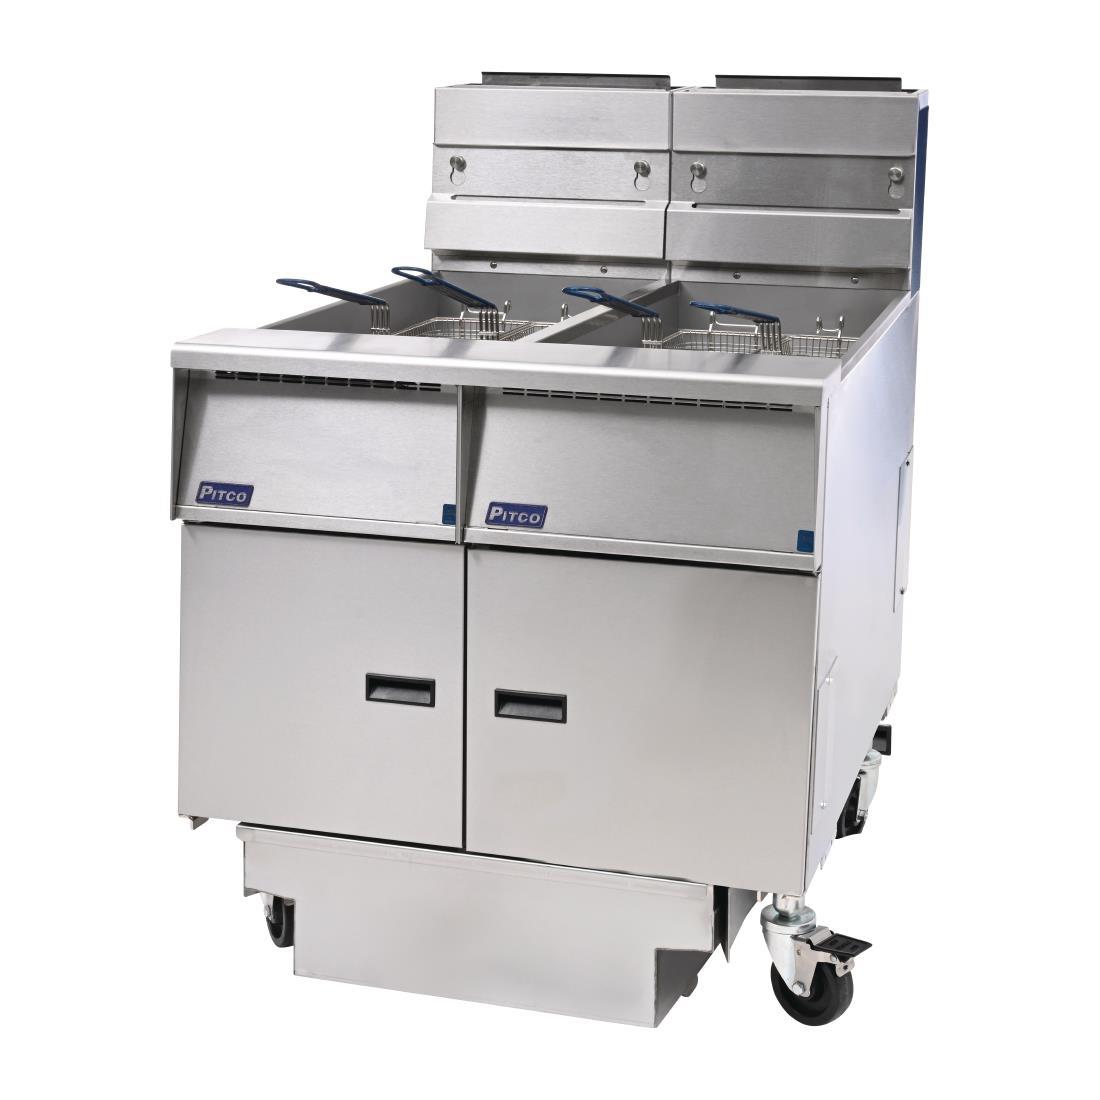 Pitco Twin Tank Solstice LPG Fryer with Filter Drawer SG14RS/FD-FF - FS128-P  - 7